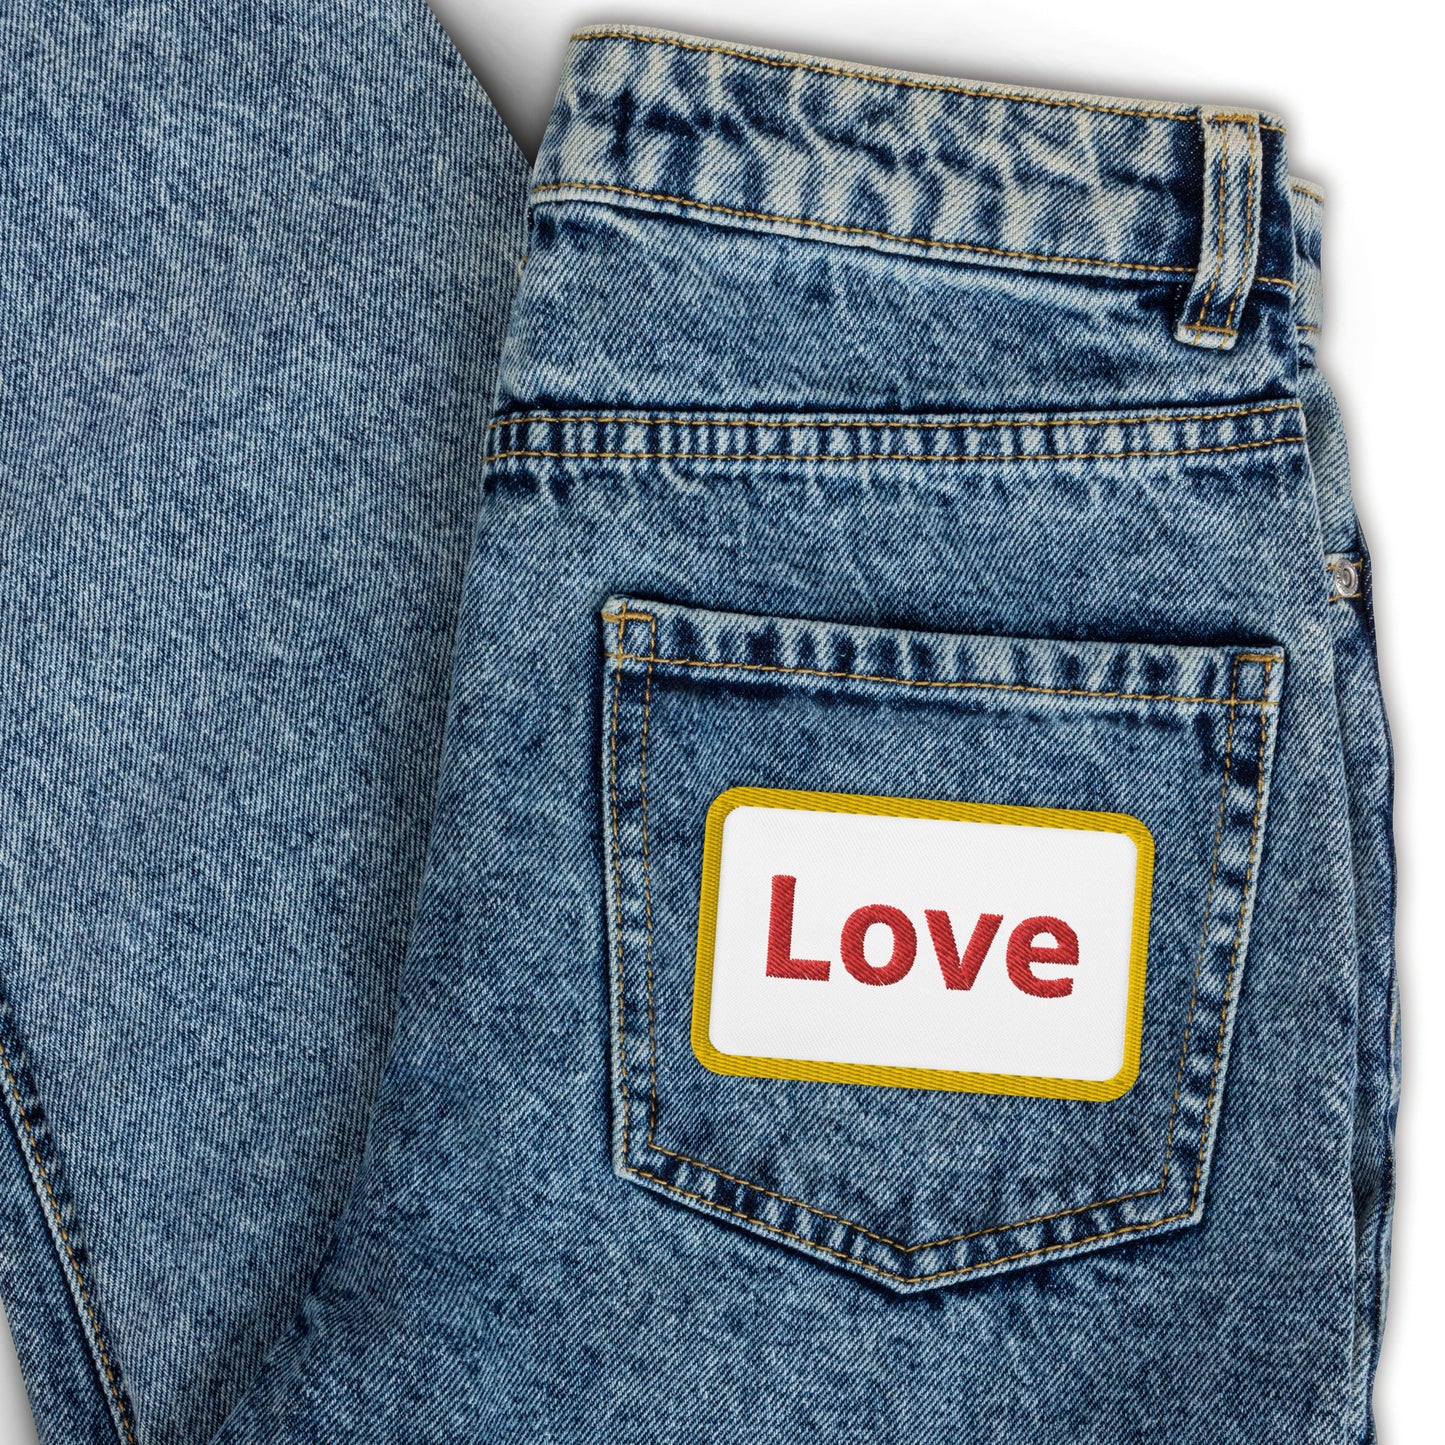 Embroidered Love Patch